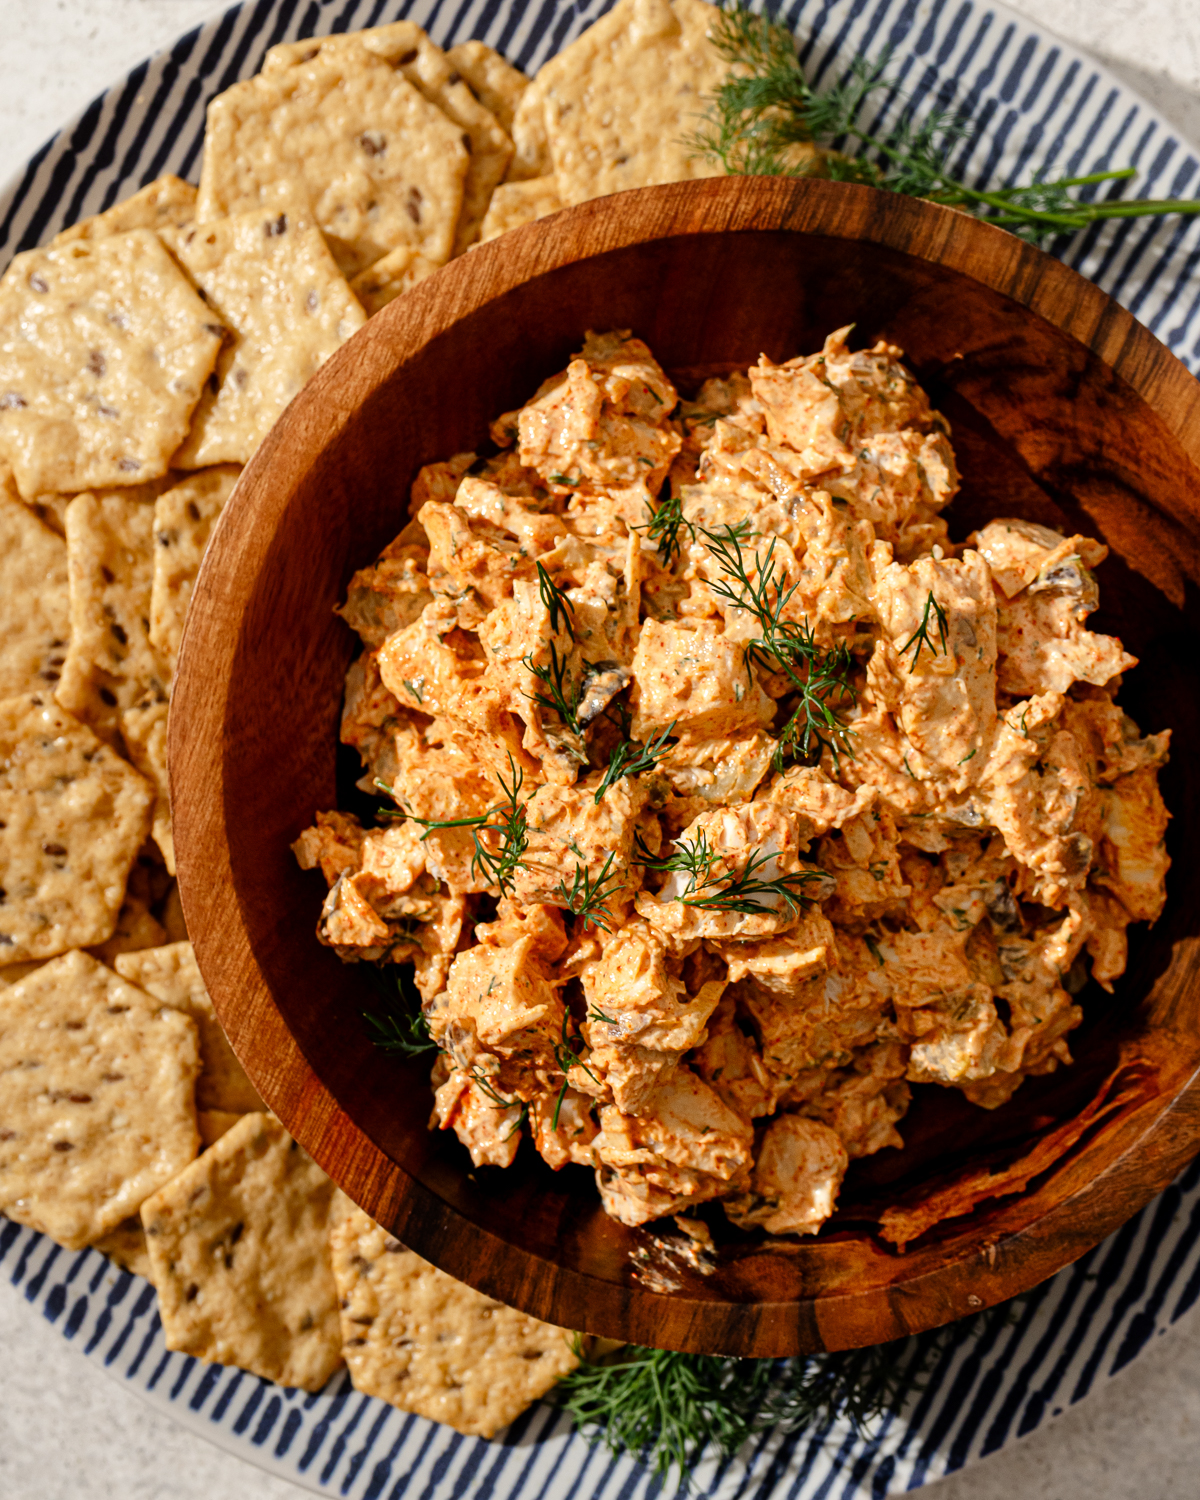 High protein chicken salad in a wooden bowl with crackers and garnish.